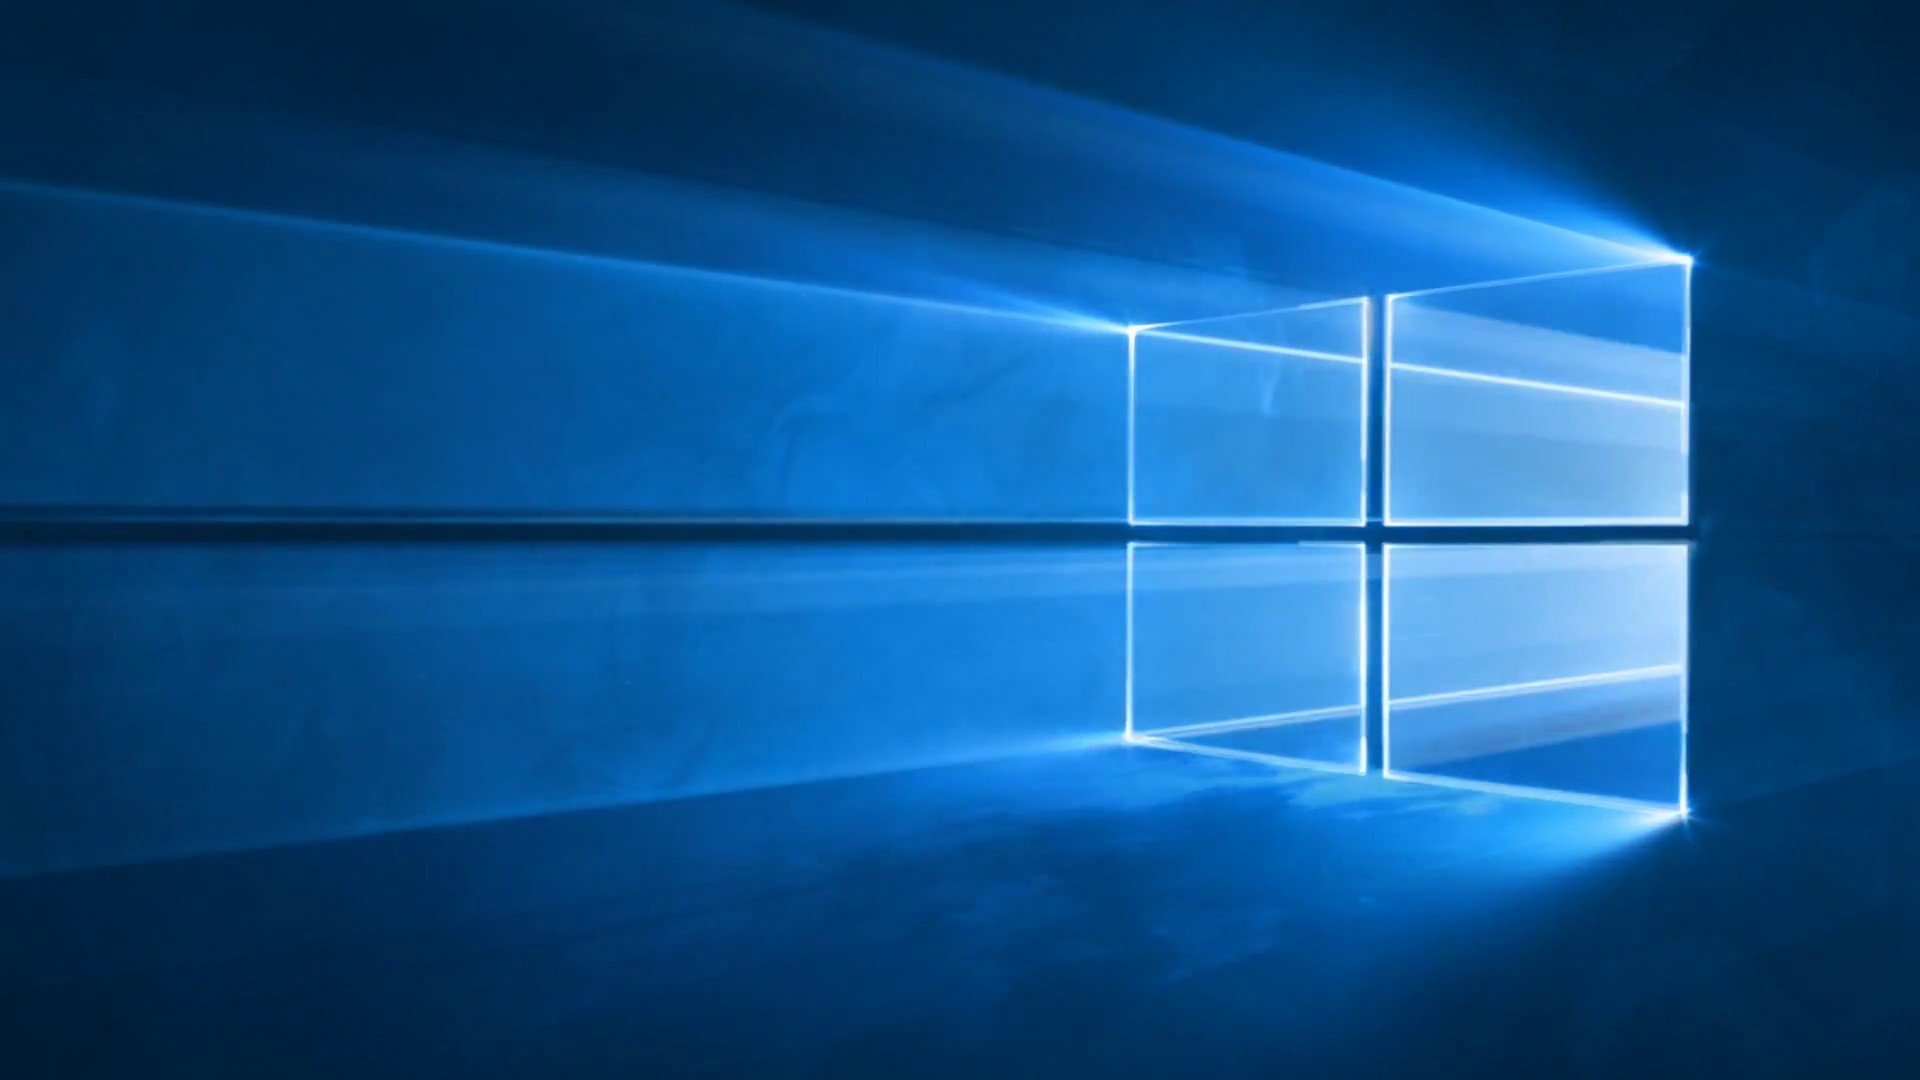 Microsoft Reveals the Official Windows 10 Wallpaper